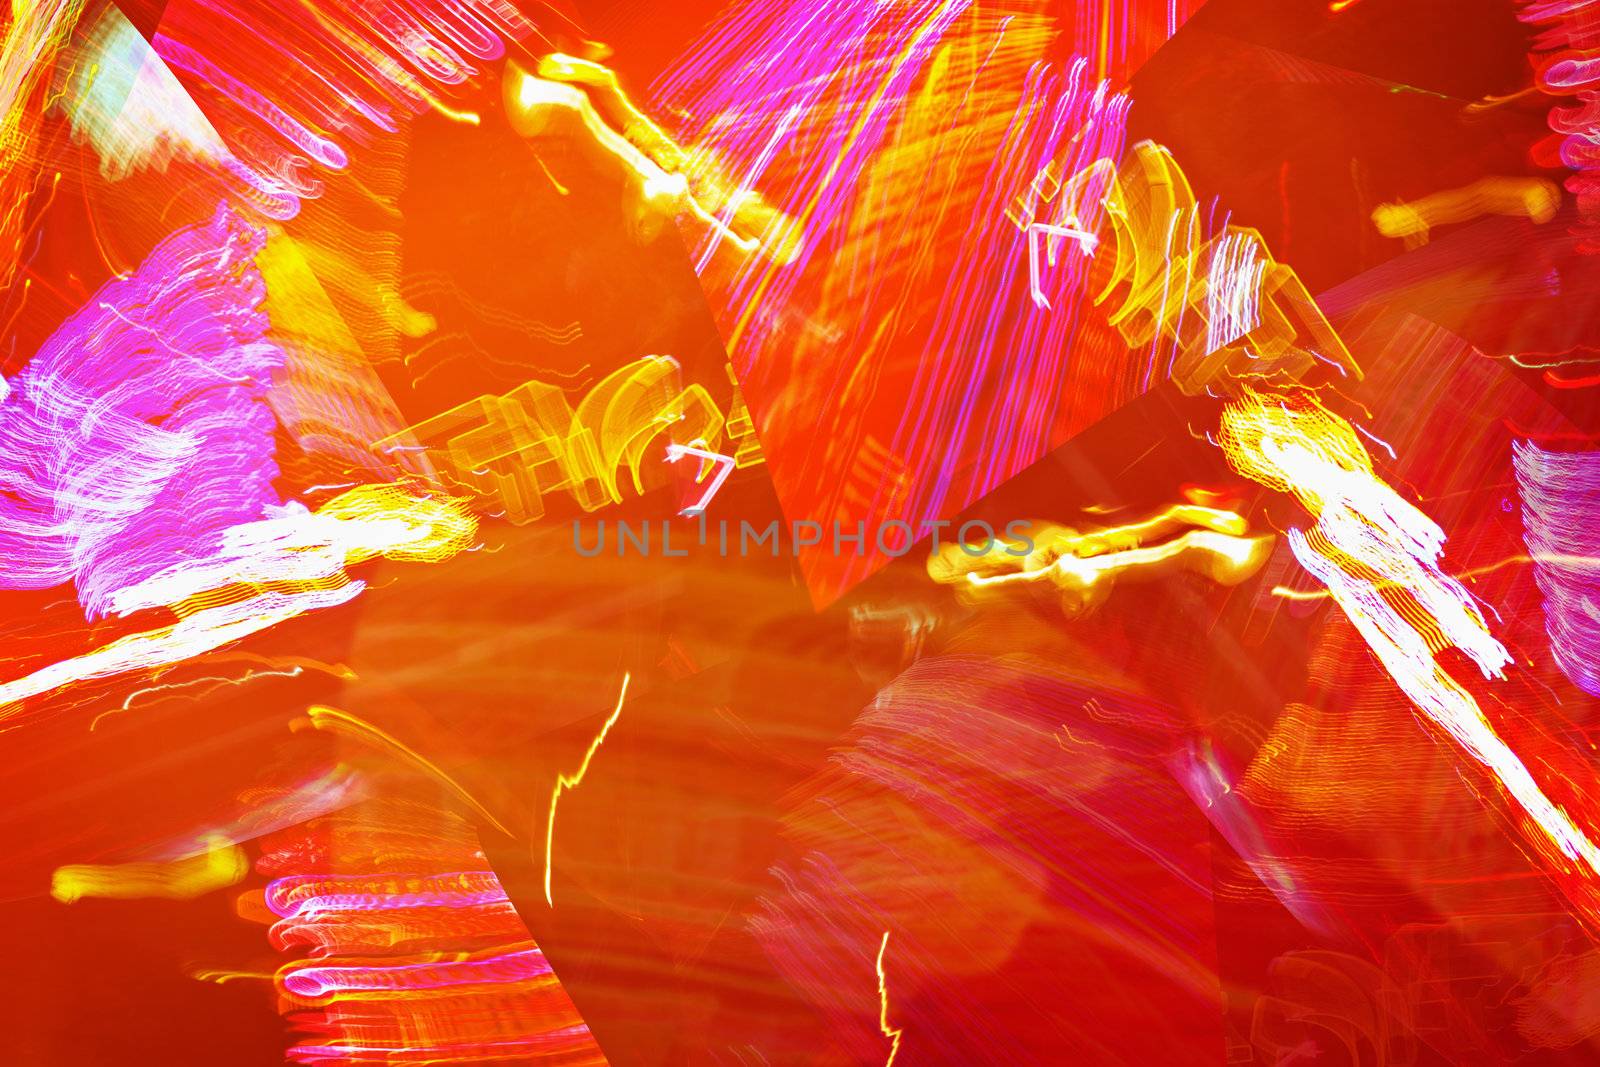 Fiery blurred abstraction - graphic orange background